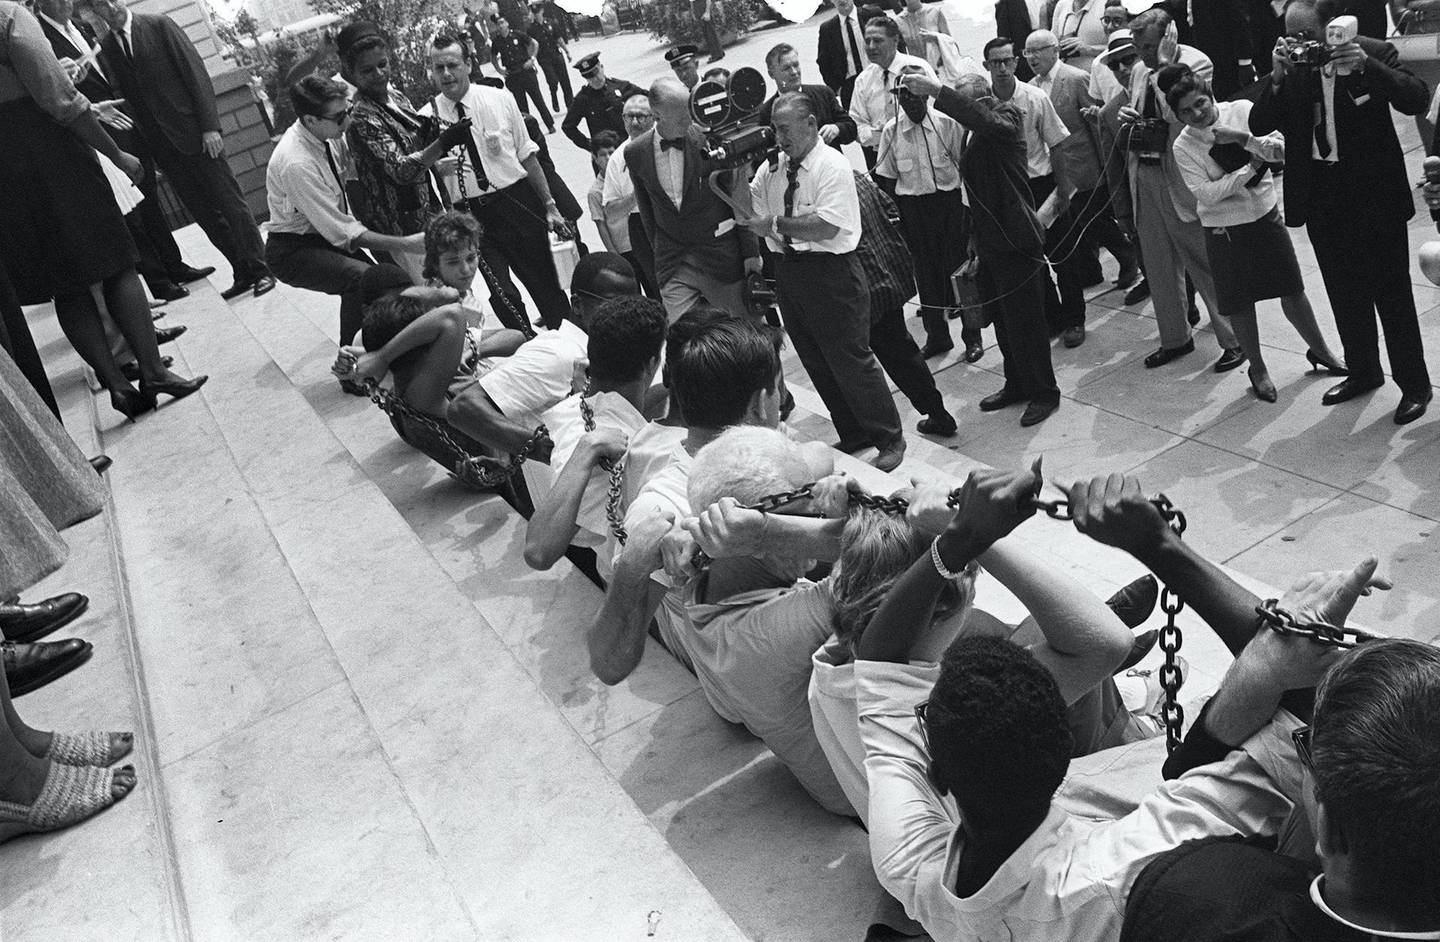 Black and white people chain themselves and sit in front of the New York City Hall, on August 23, 1963, during a protest against segregation in some of states in America. 1963 is noted for racial unrest and civil rights demonstrations from California to New York, culminating in the March on Washington on August 1963 with Martin Luther King, Jr. (Photo by - / AFP)